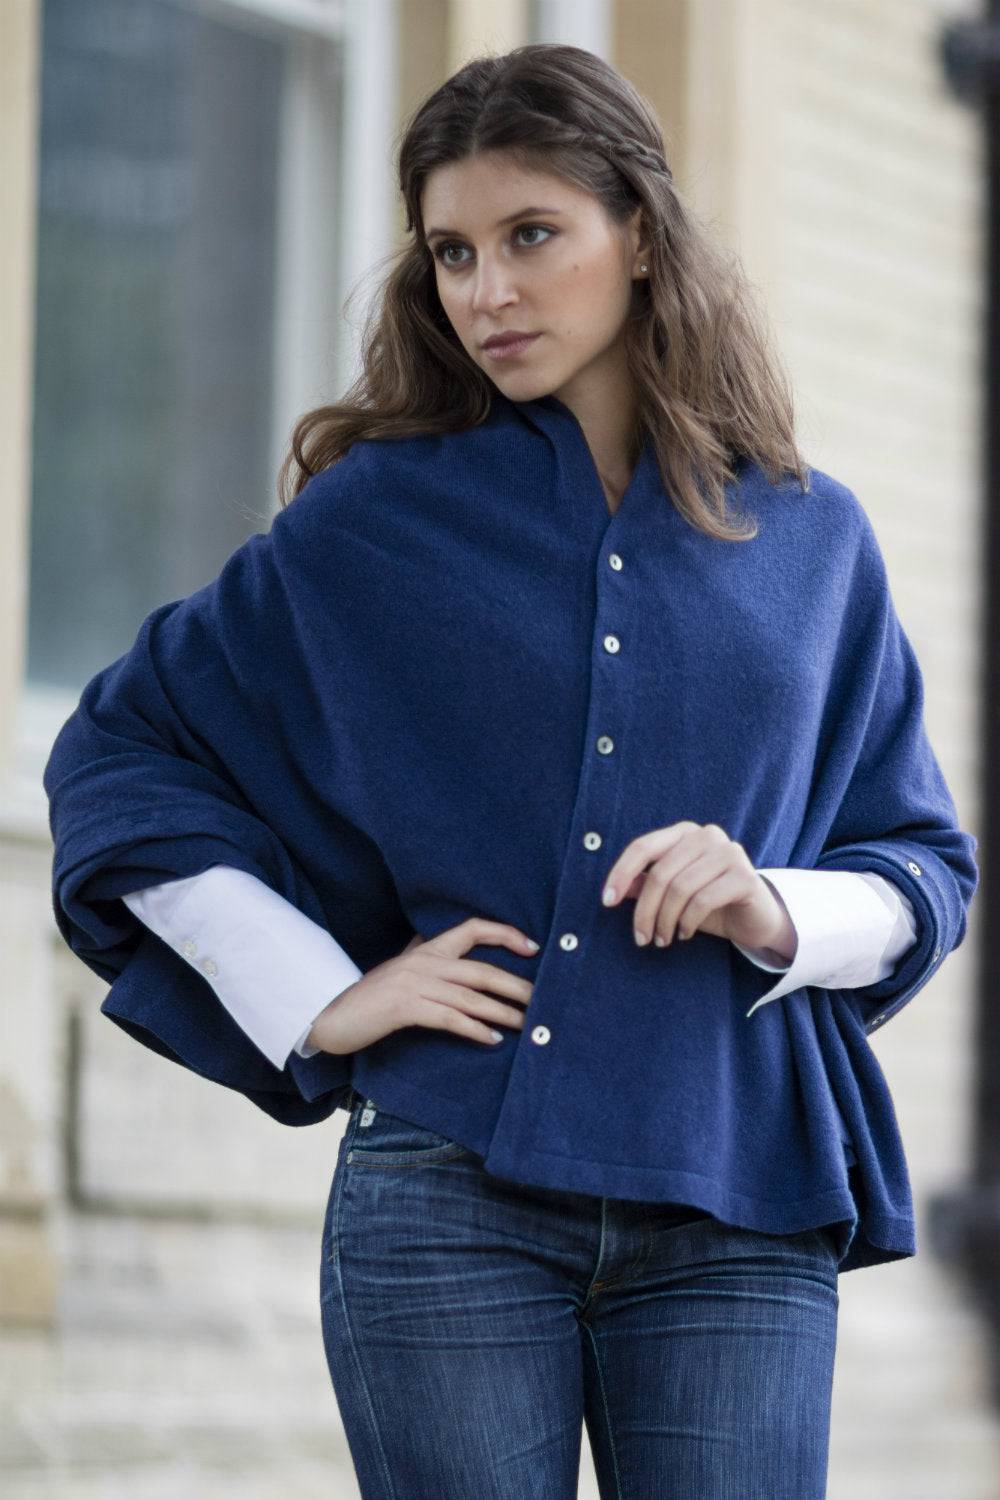 Cashmere & Merino Wool Short Length Button Poncho in Navy Blue by Woodcock & Cavendish for sale - Woodcock and Cavendish